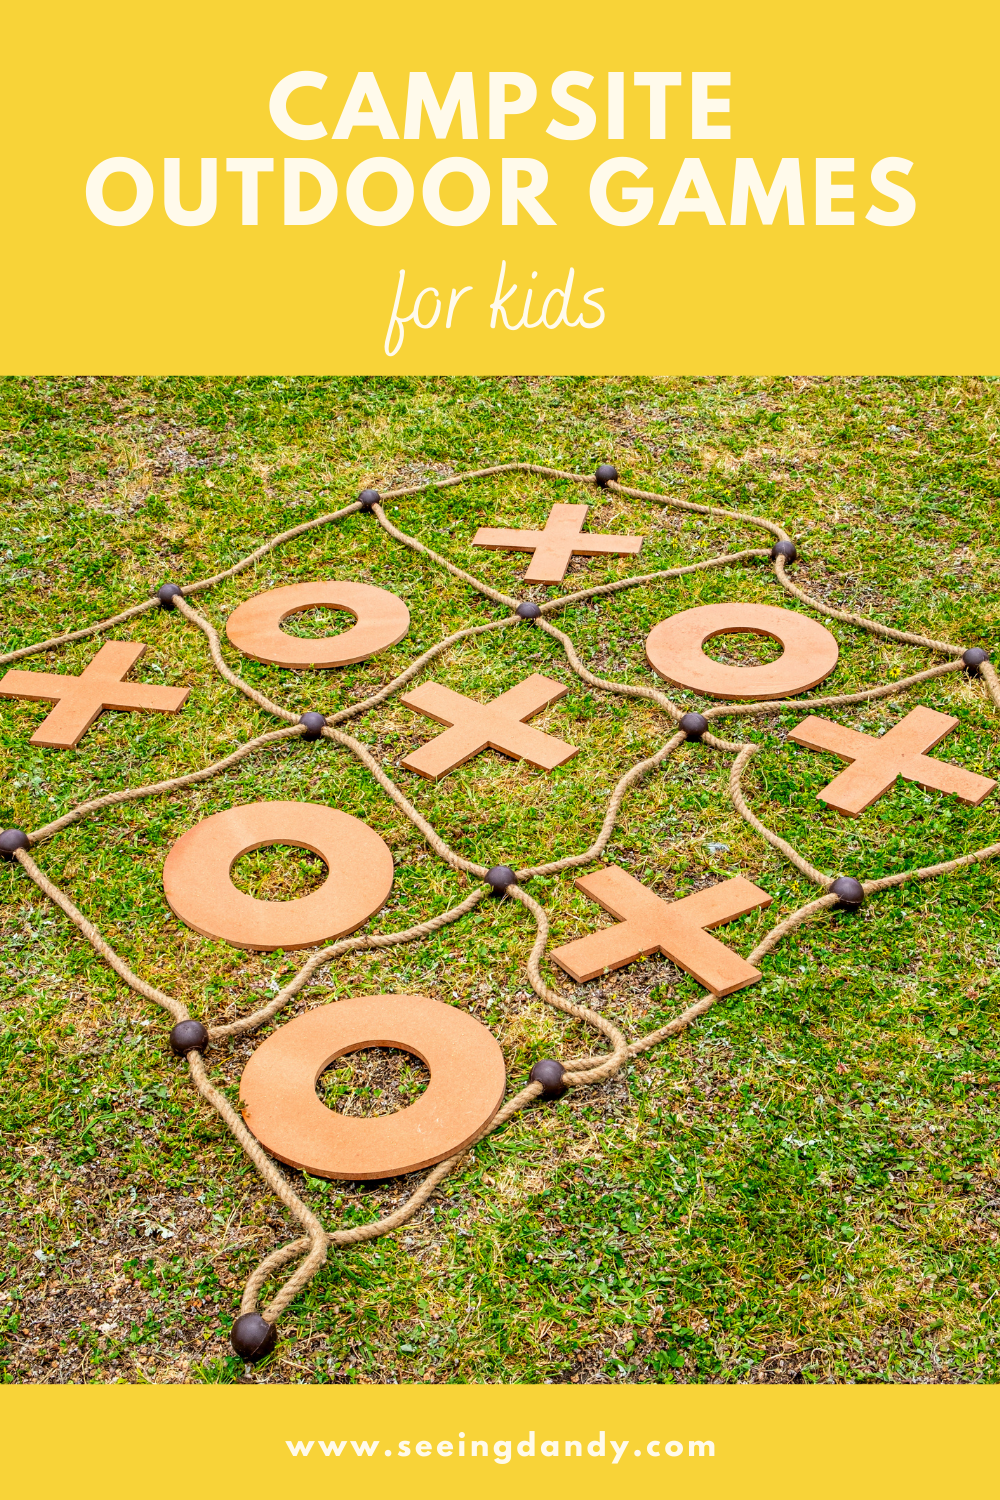 campsite outdoor games for kids, tic tac toe rope yard game, oversized tic tac toe, camping, family travel, family fun, family activities, lawn games